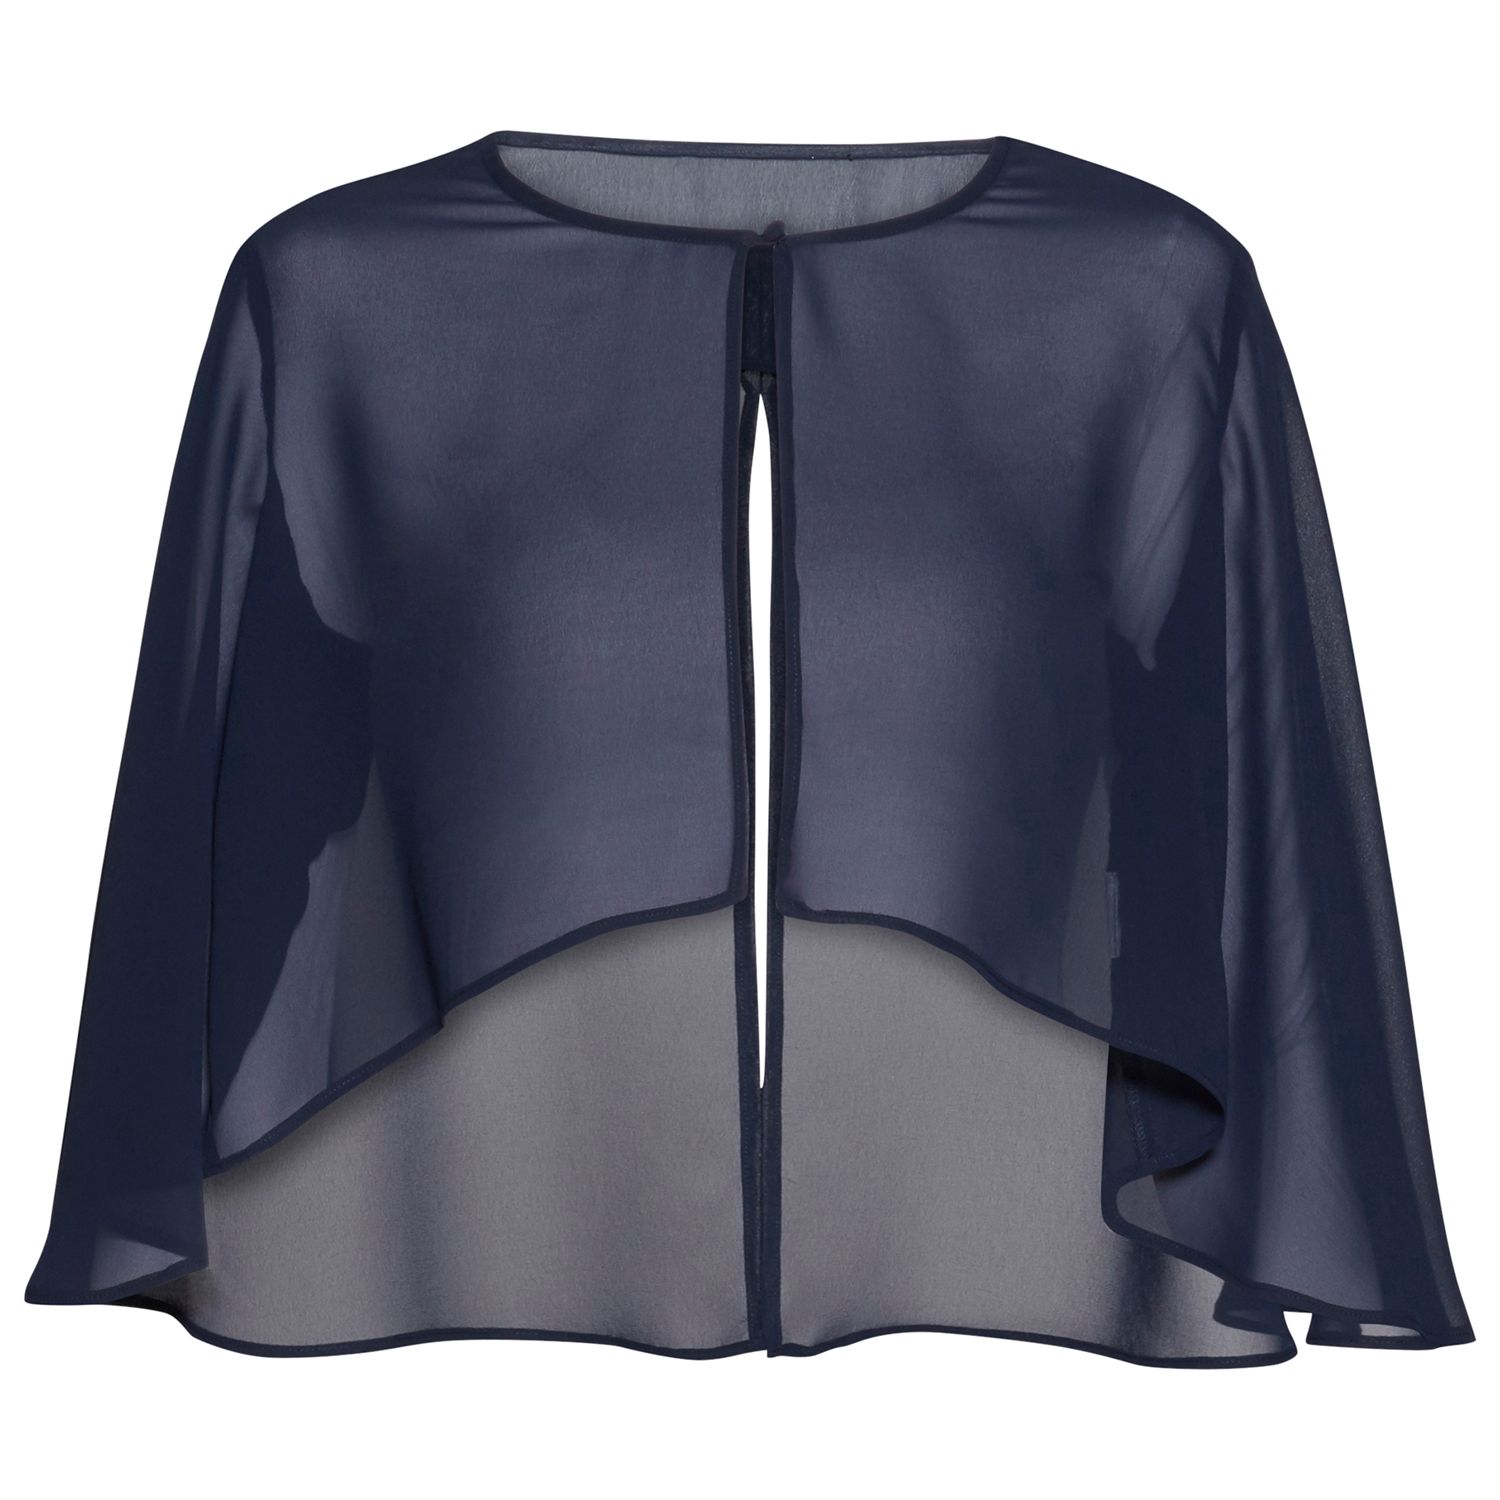 Gina Bacconi Chiffon Cape With Open Back Detail, Spring Navy, 18